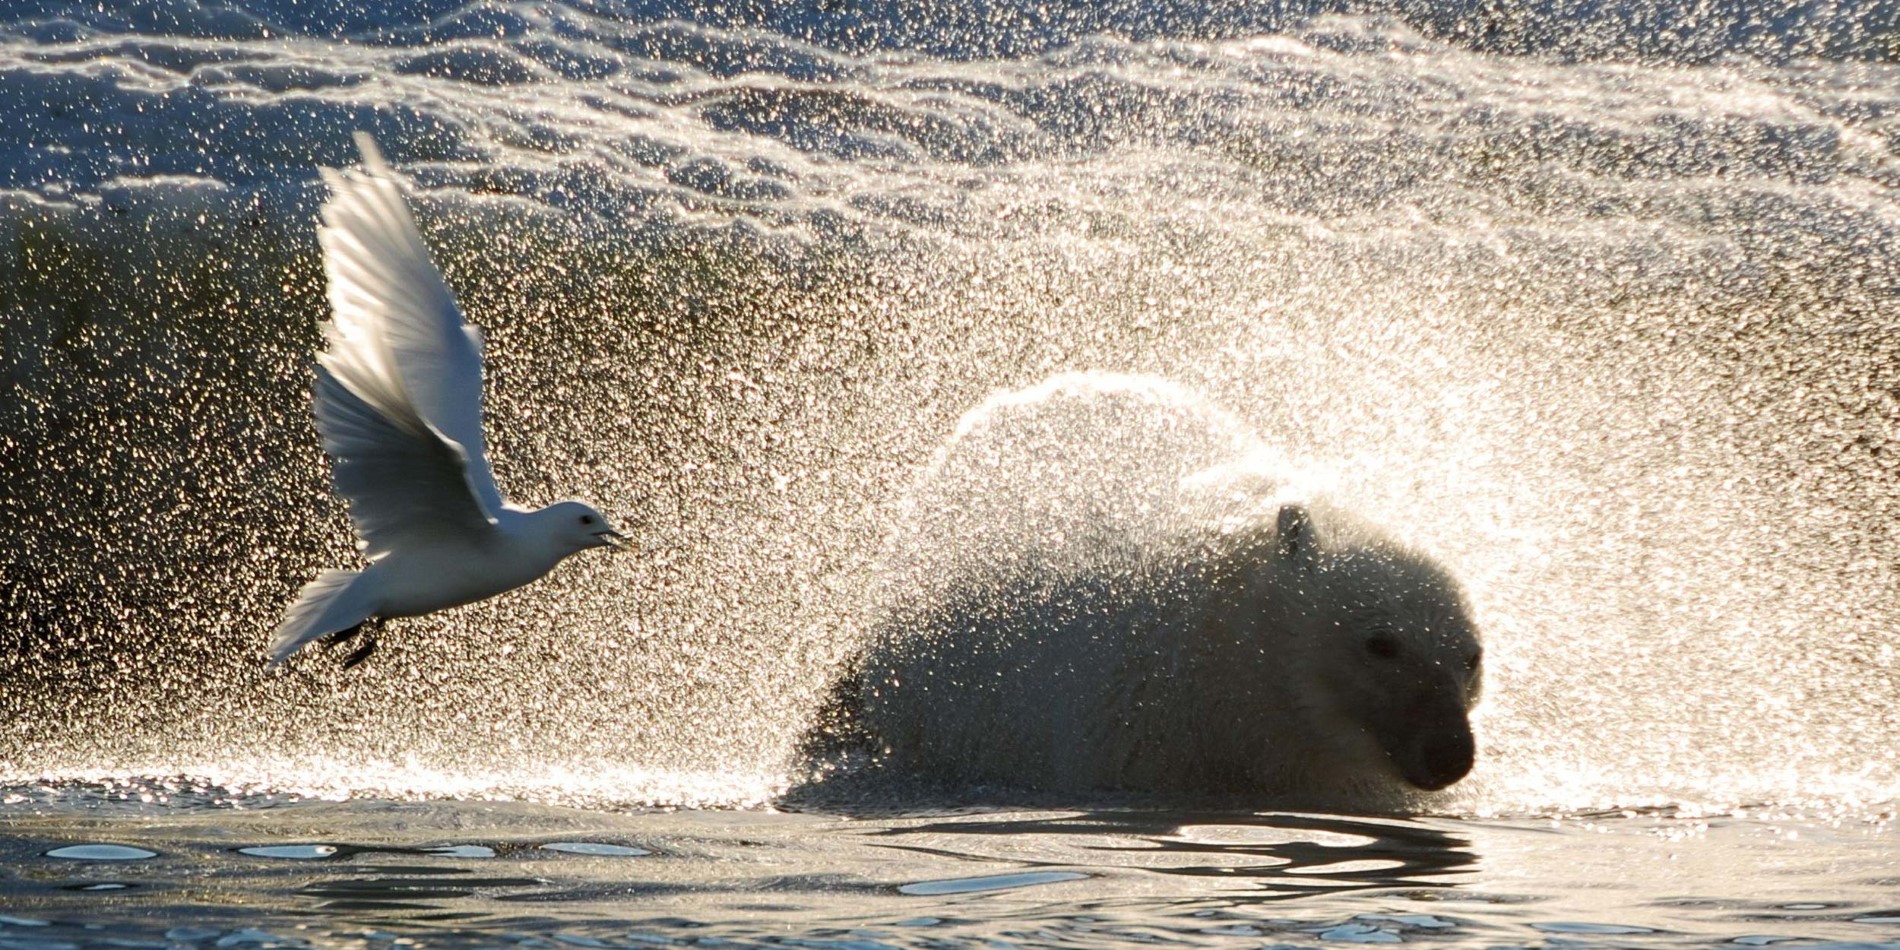 Spitsbergen is the realm of the polar bears, and we hope to see the King of the Arctic